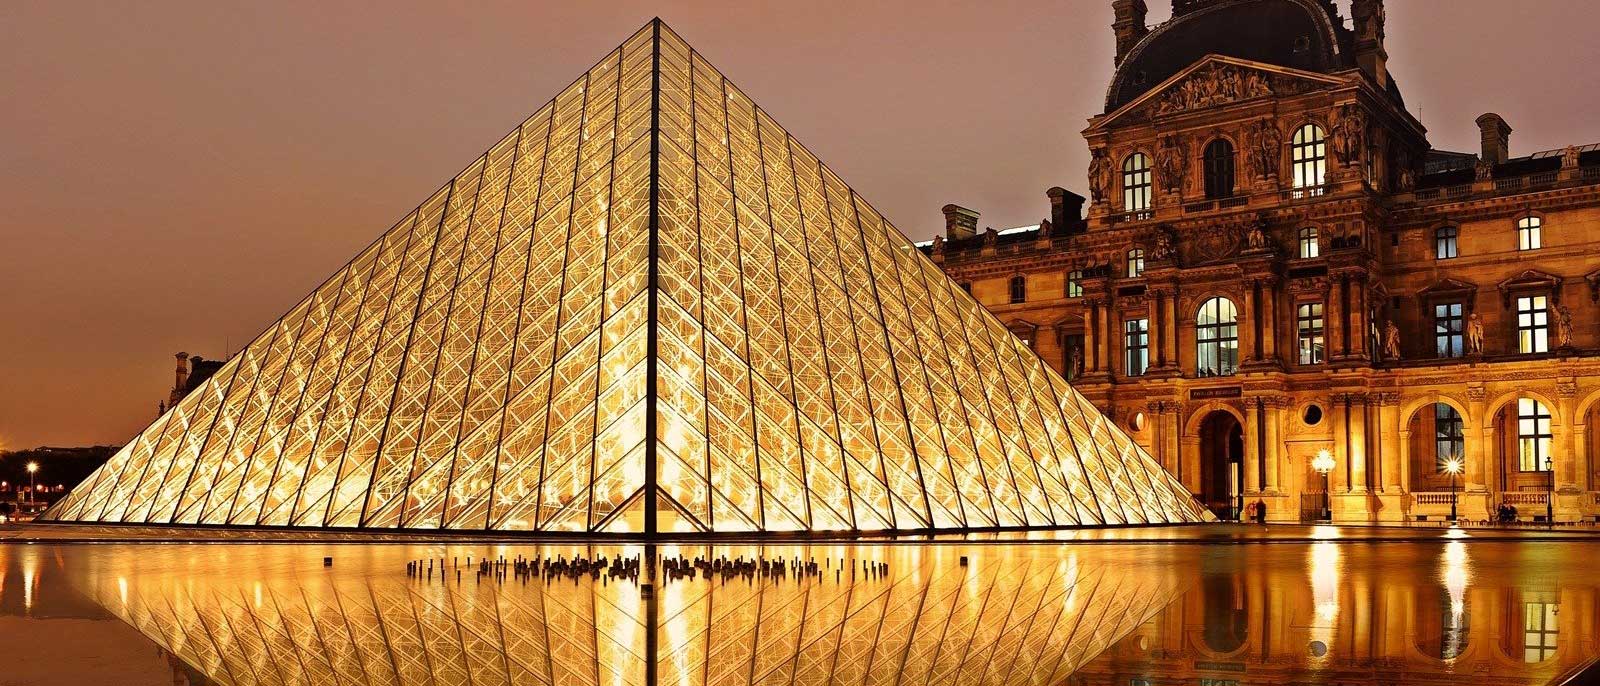 the louvre pyramid at night all lit up